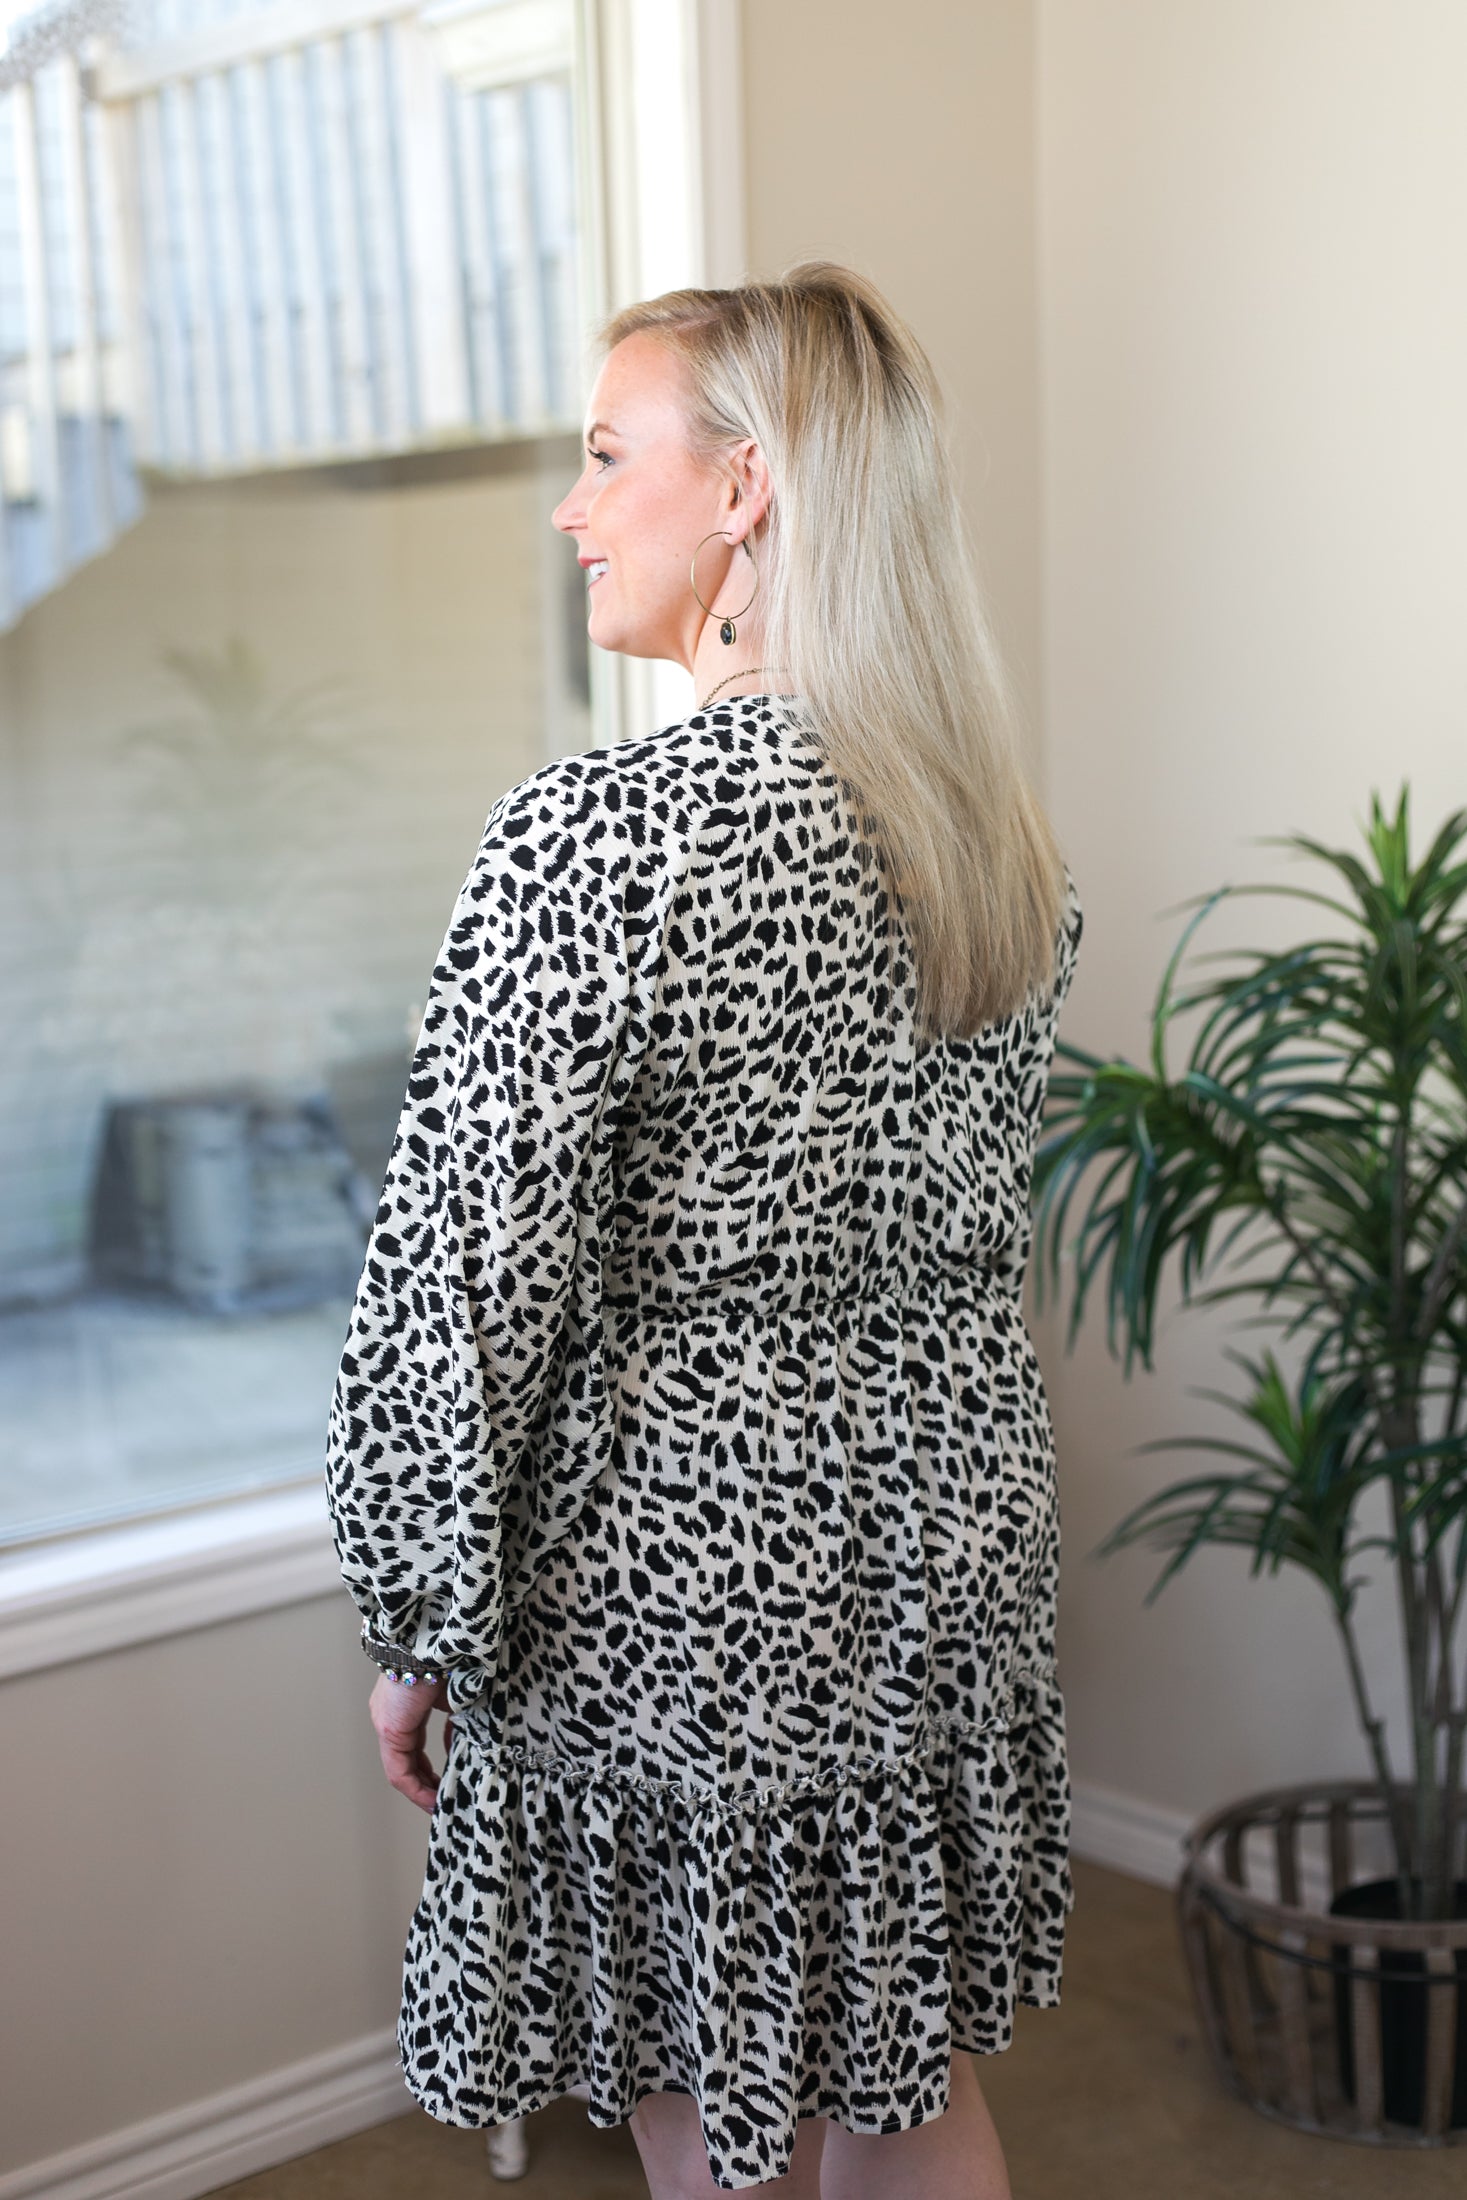 Always Fierce Cheetah Spotted Dress with Front Tie in Ivory - Giddy Up Glamour Boutique